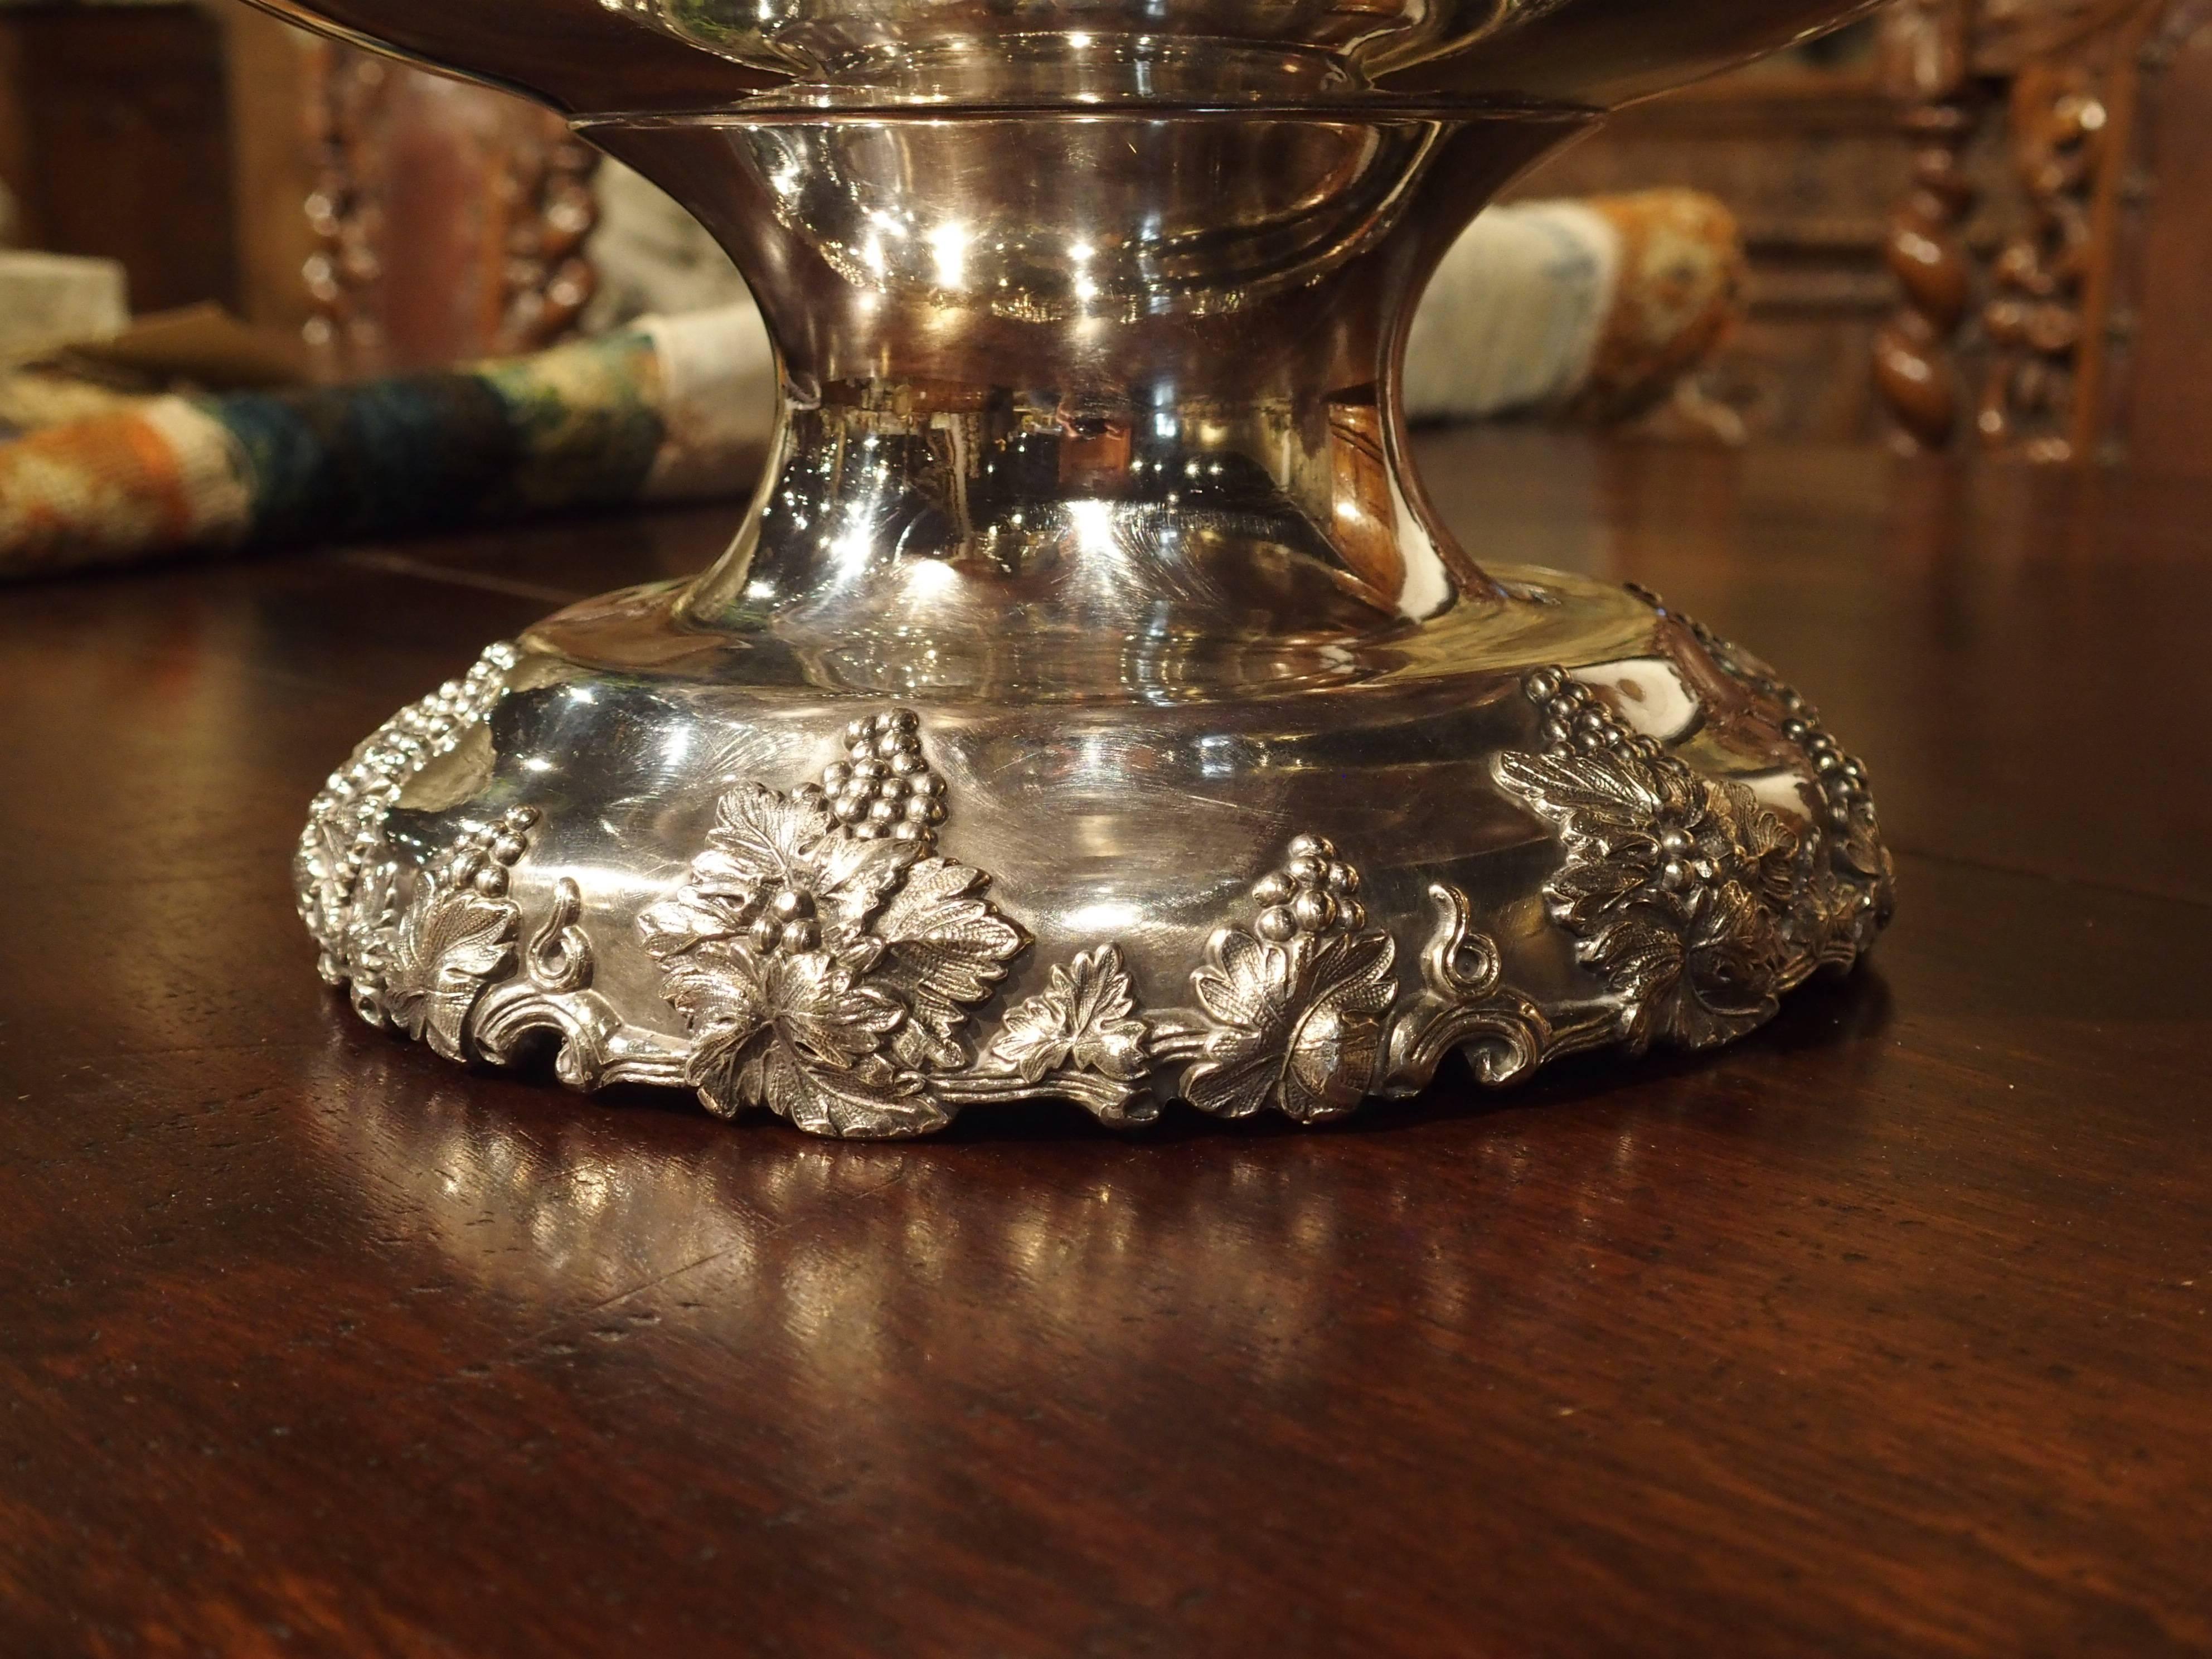 This magnificent silver plated punch bowl and tray have detailed motifs of various sized grape clusters with leaves around all of its outer borders. Interspersed throughout these motifs are varying sizes and shapes of C-Scrolls. Punch bowls with